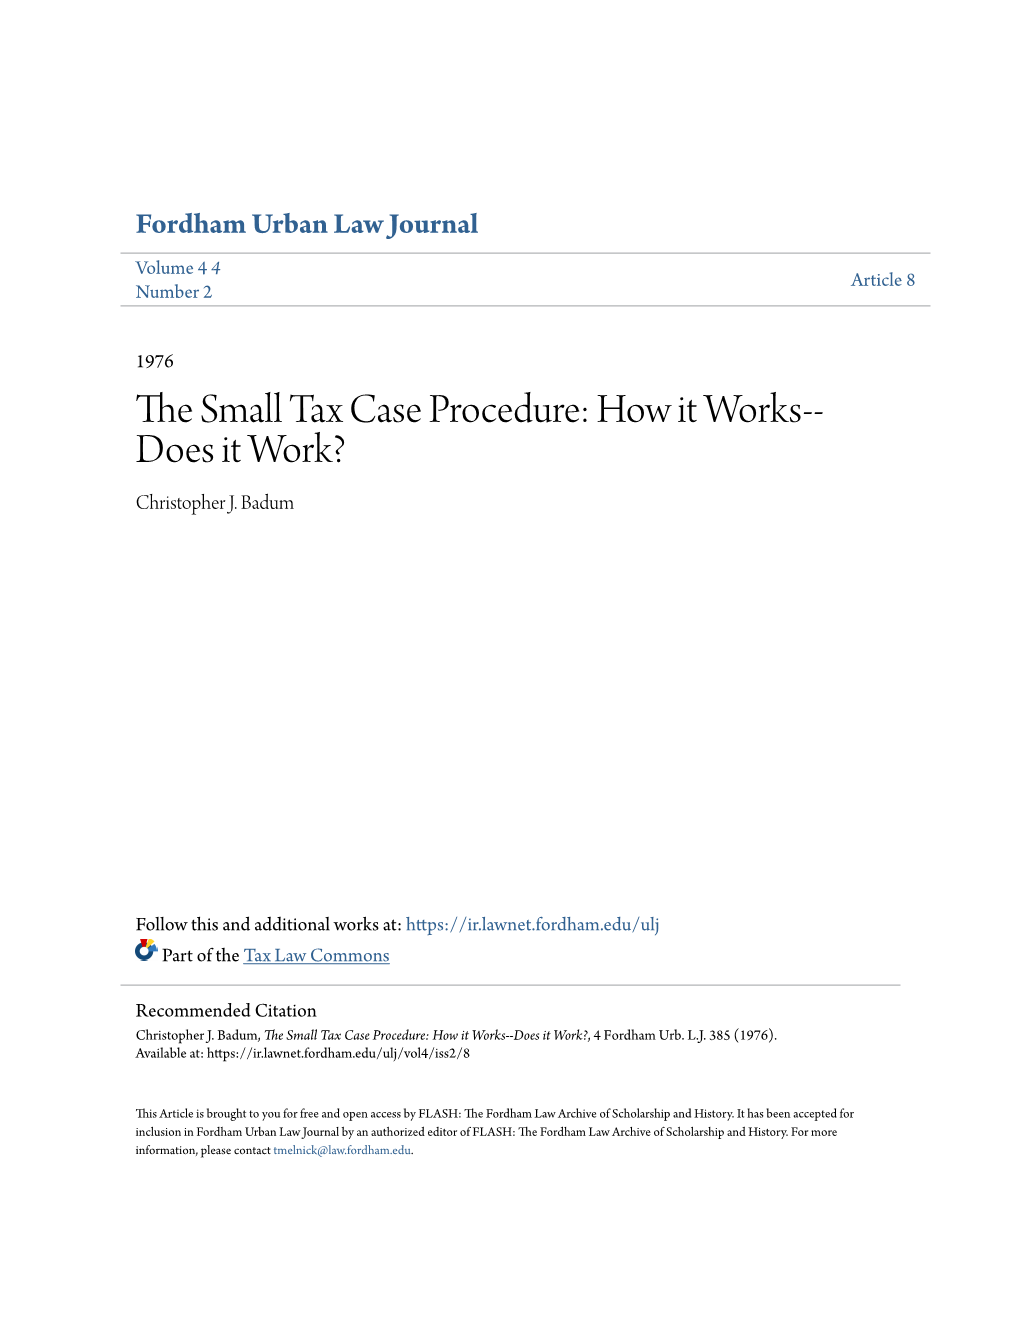 The Small Tax Case Procedure: How It Works--Does It Work?, 4 Fordham Urb